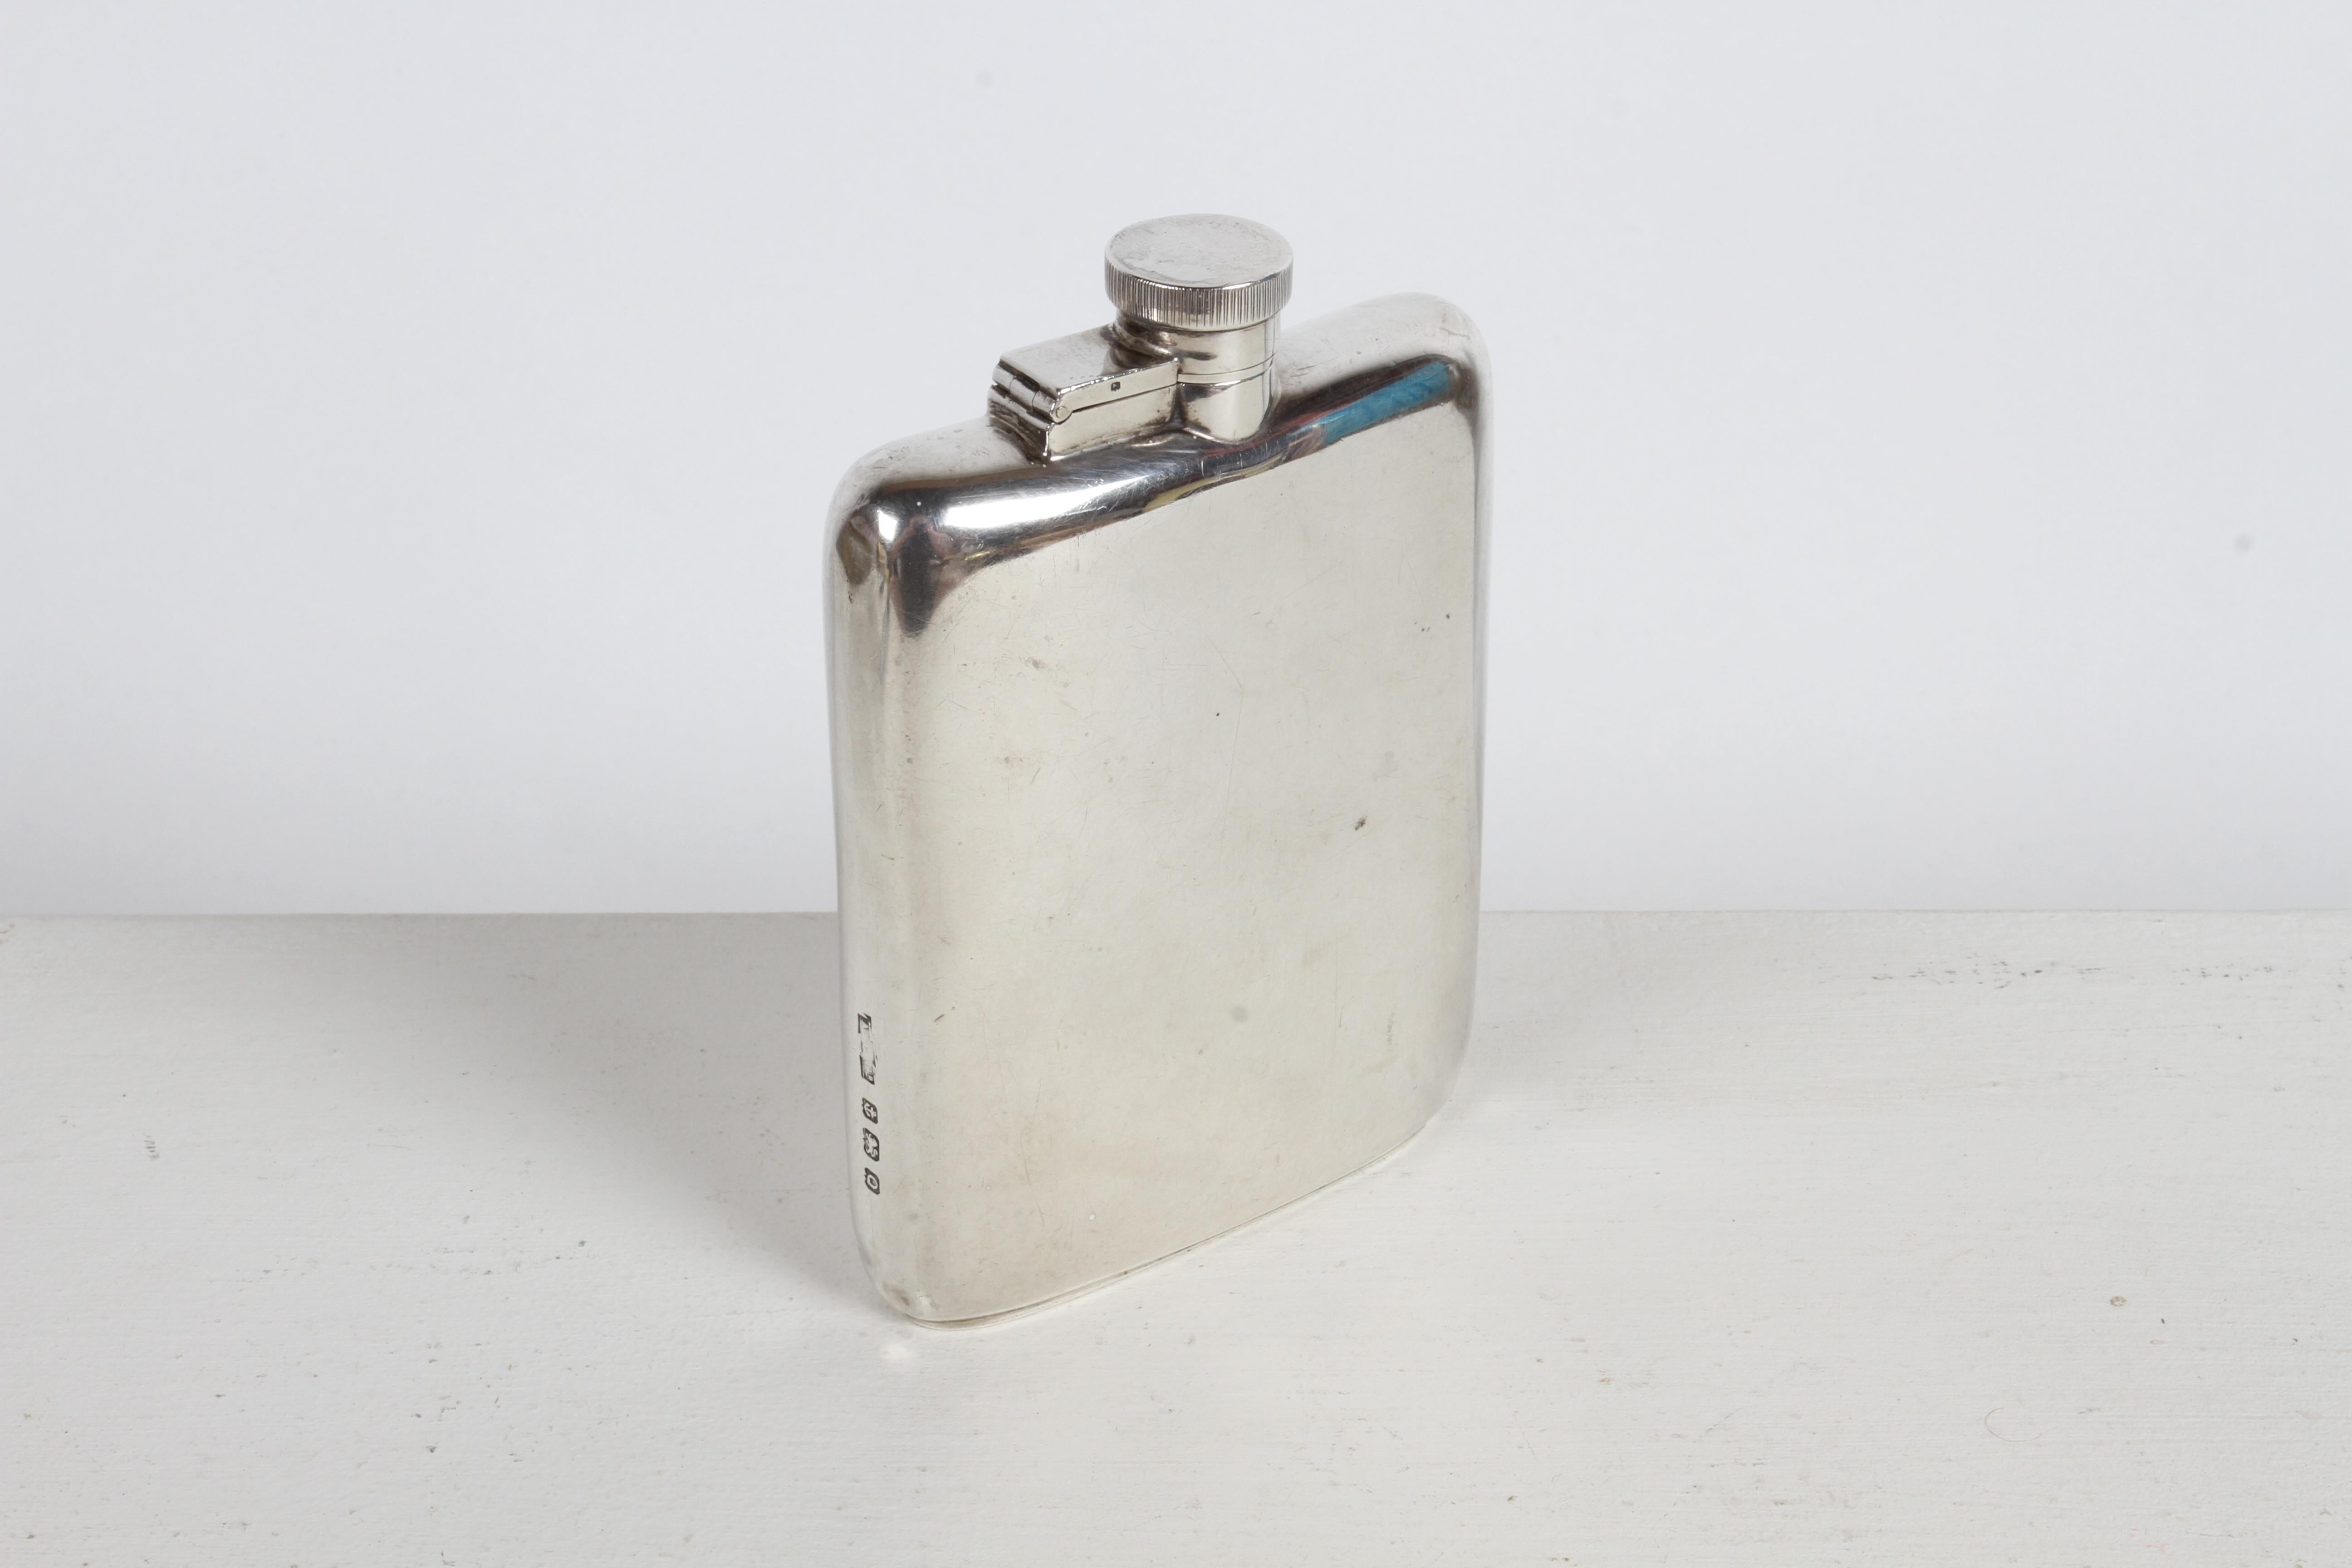 Sleek & elegant gentleman's pocket spirits hip flask in sterling silver by Asprey London circa 1940 with slight curve to body, great craftsmanship. Hallmarked Asprey London with assay marks of a Lion & Q. Has typical scuffs and a few dings from use